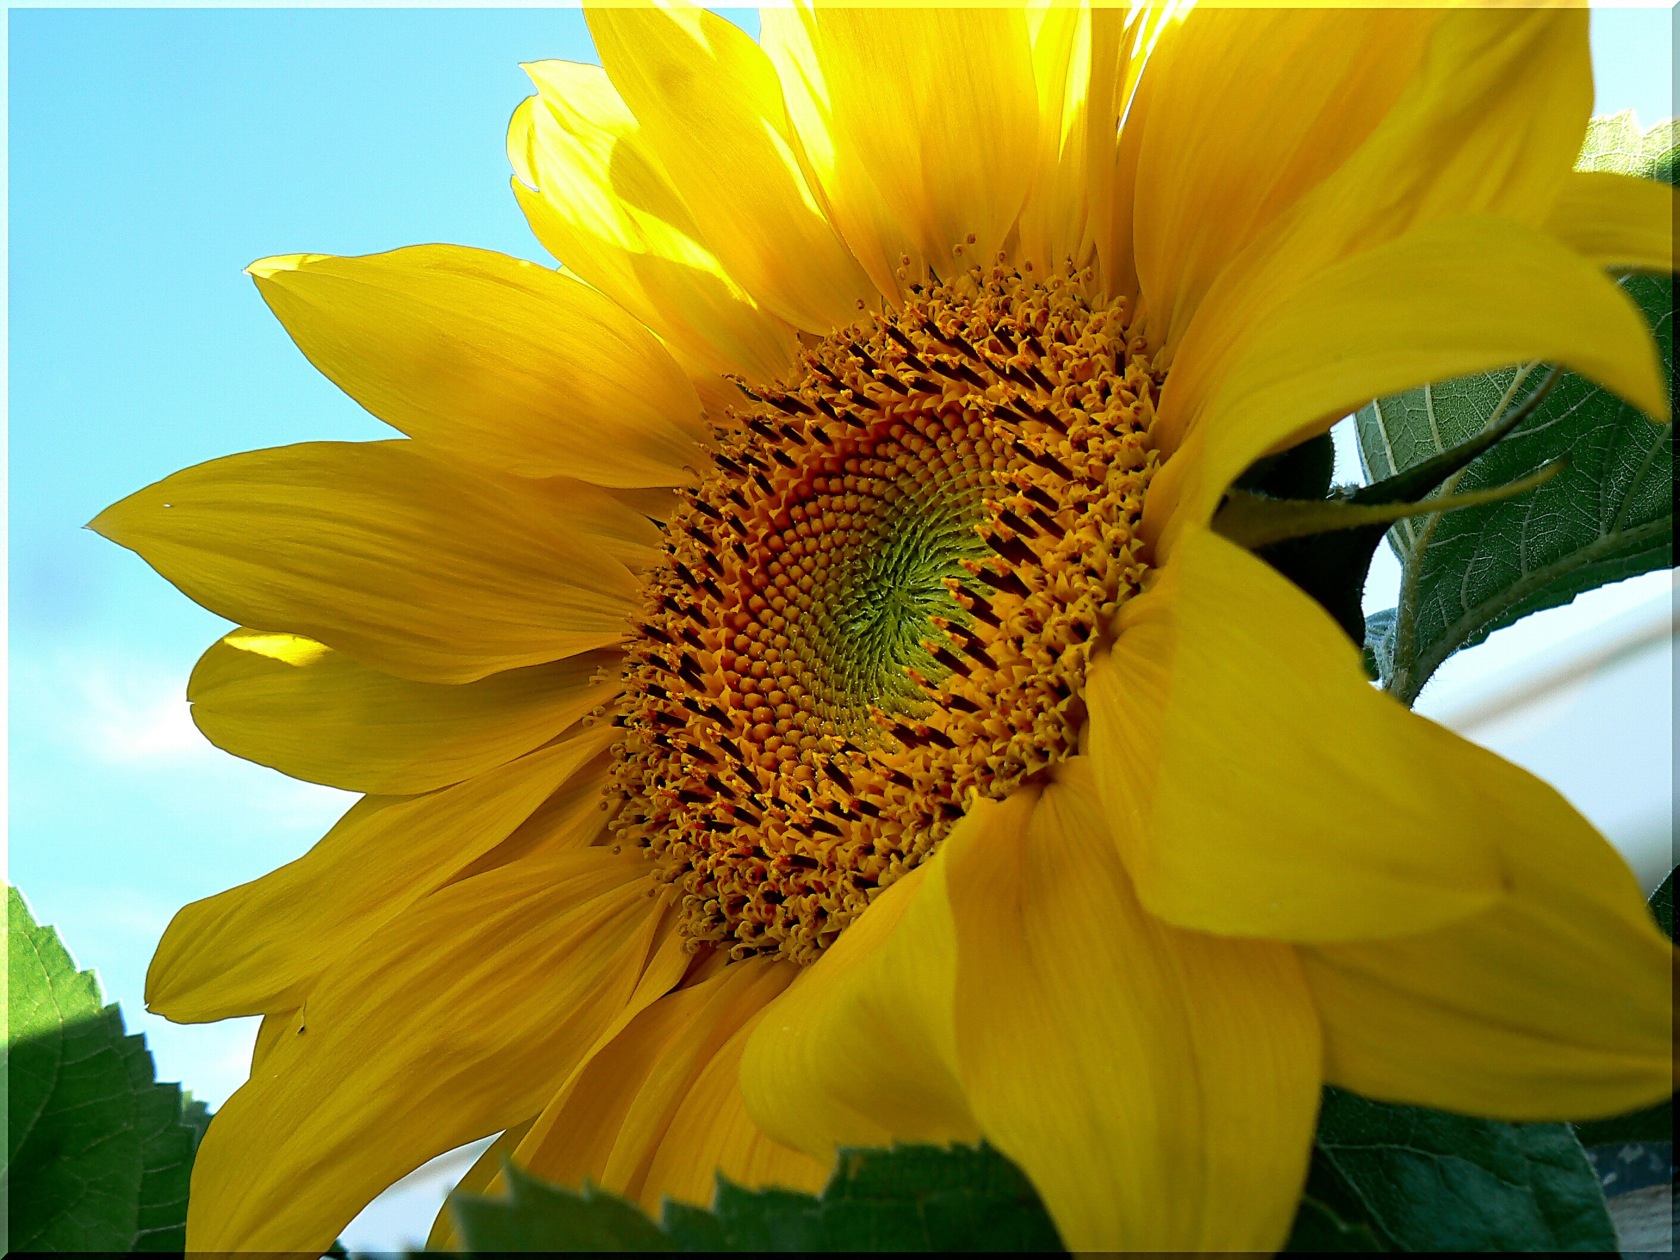 Earth Sunflower HD Wallpaper | Background Image